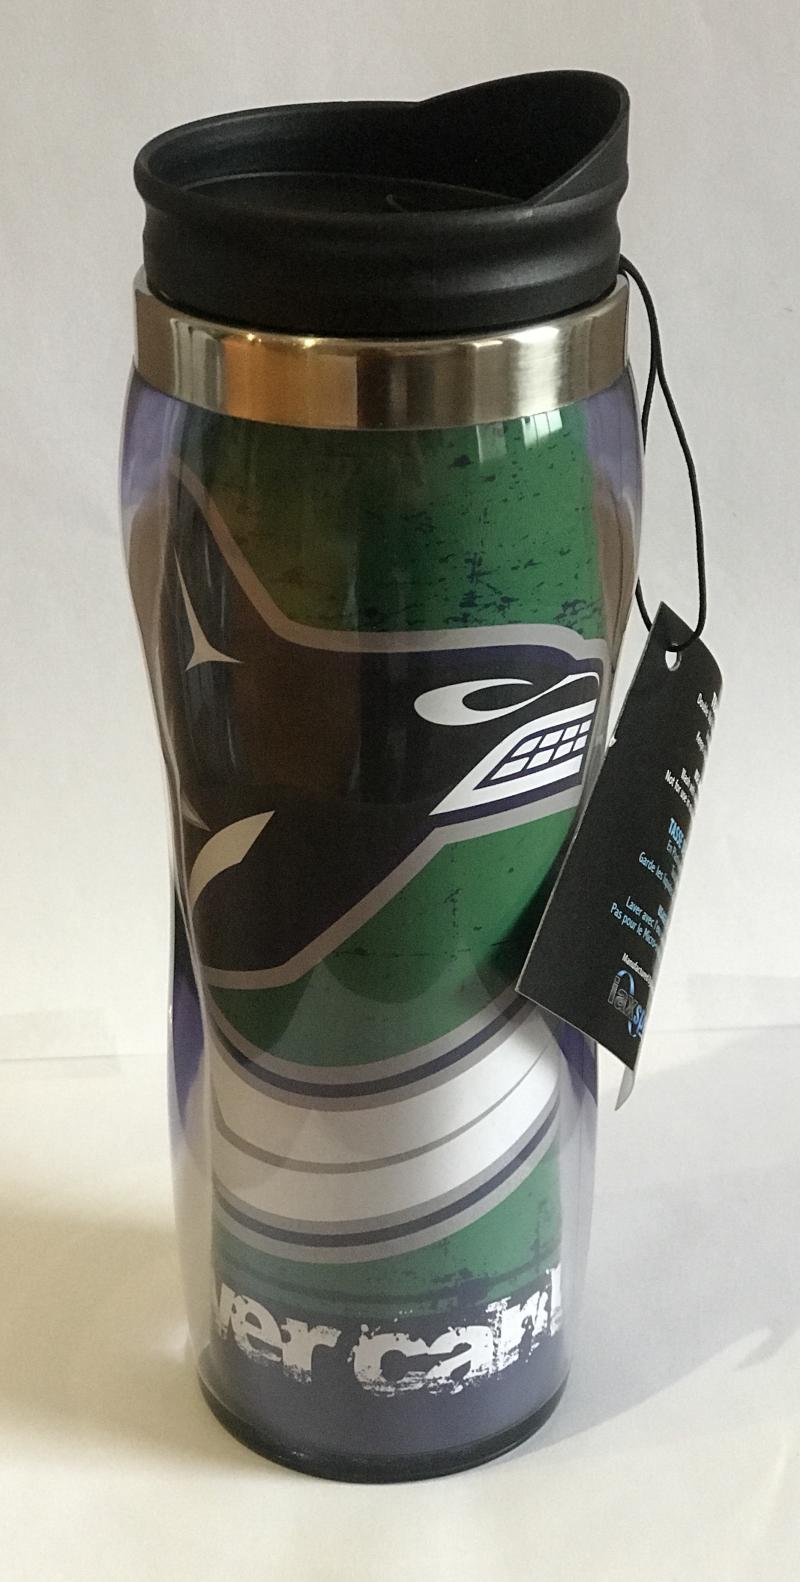 Vancouver Canucks 14oz Insulated Tumbler - Keep Liquids Hot/Cold Image 1